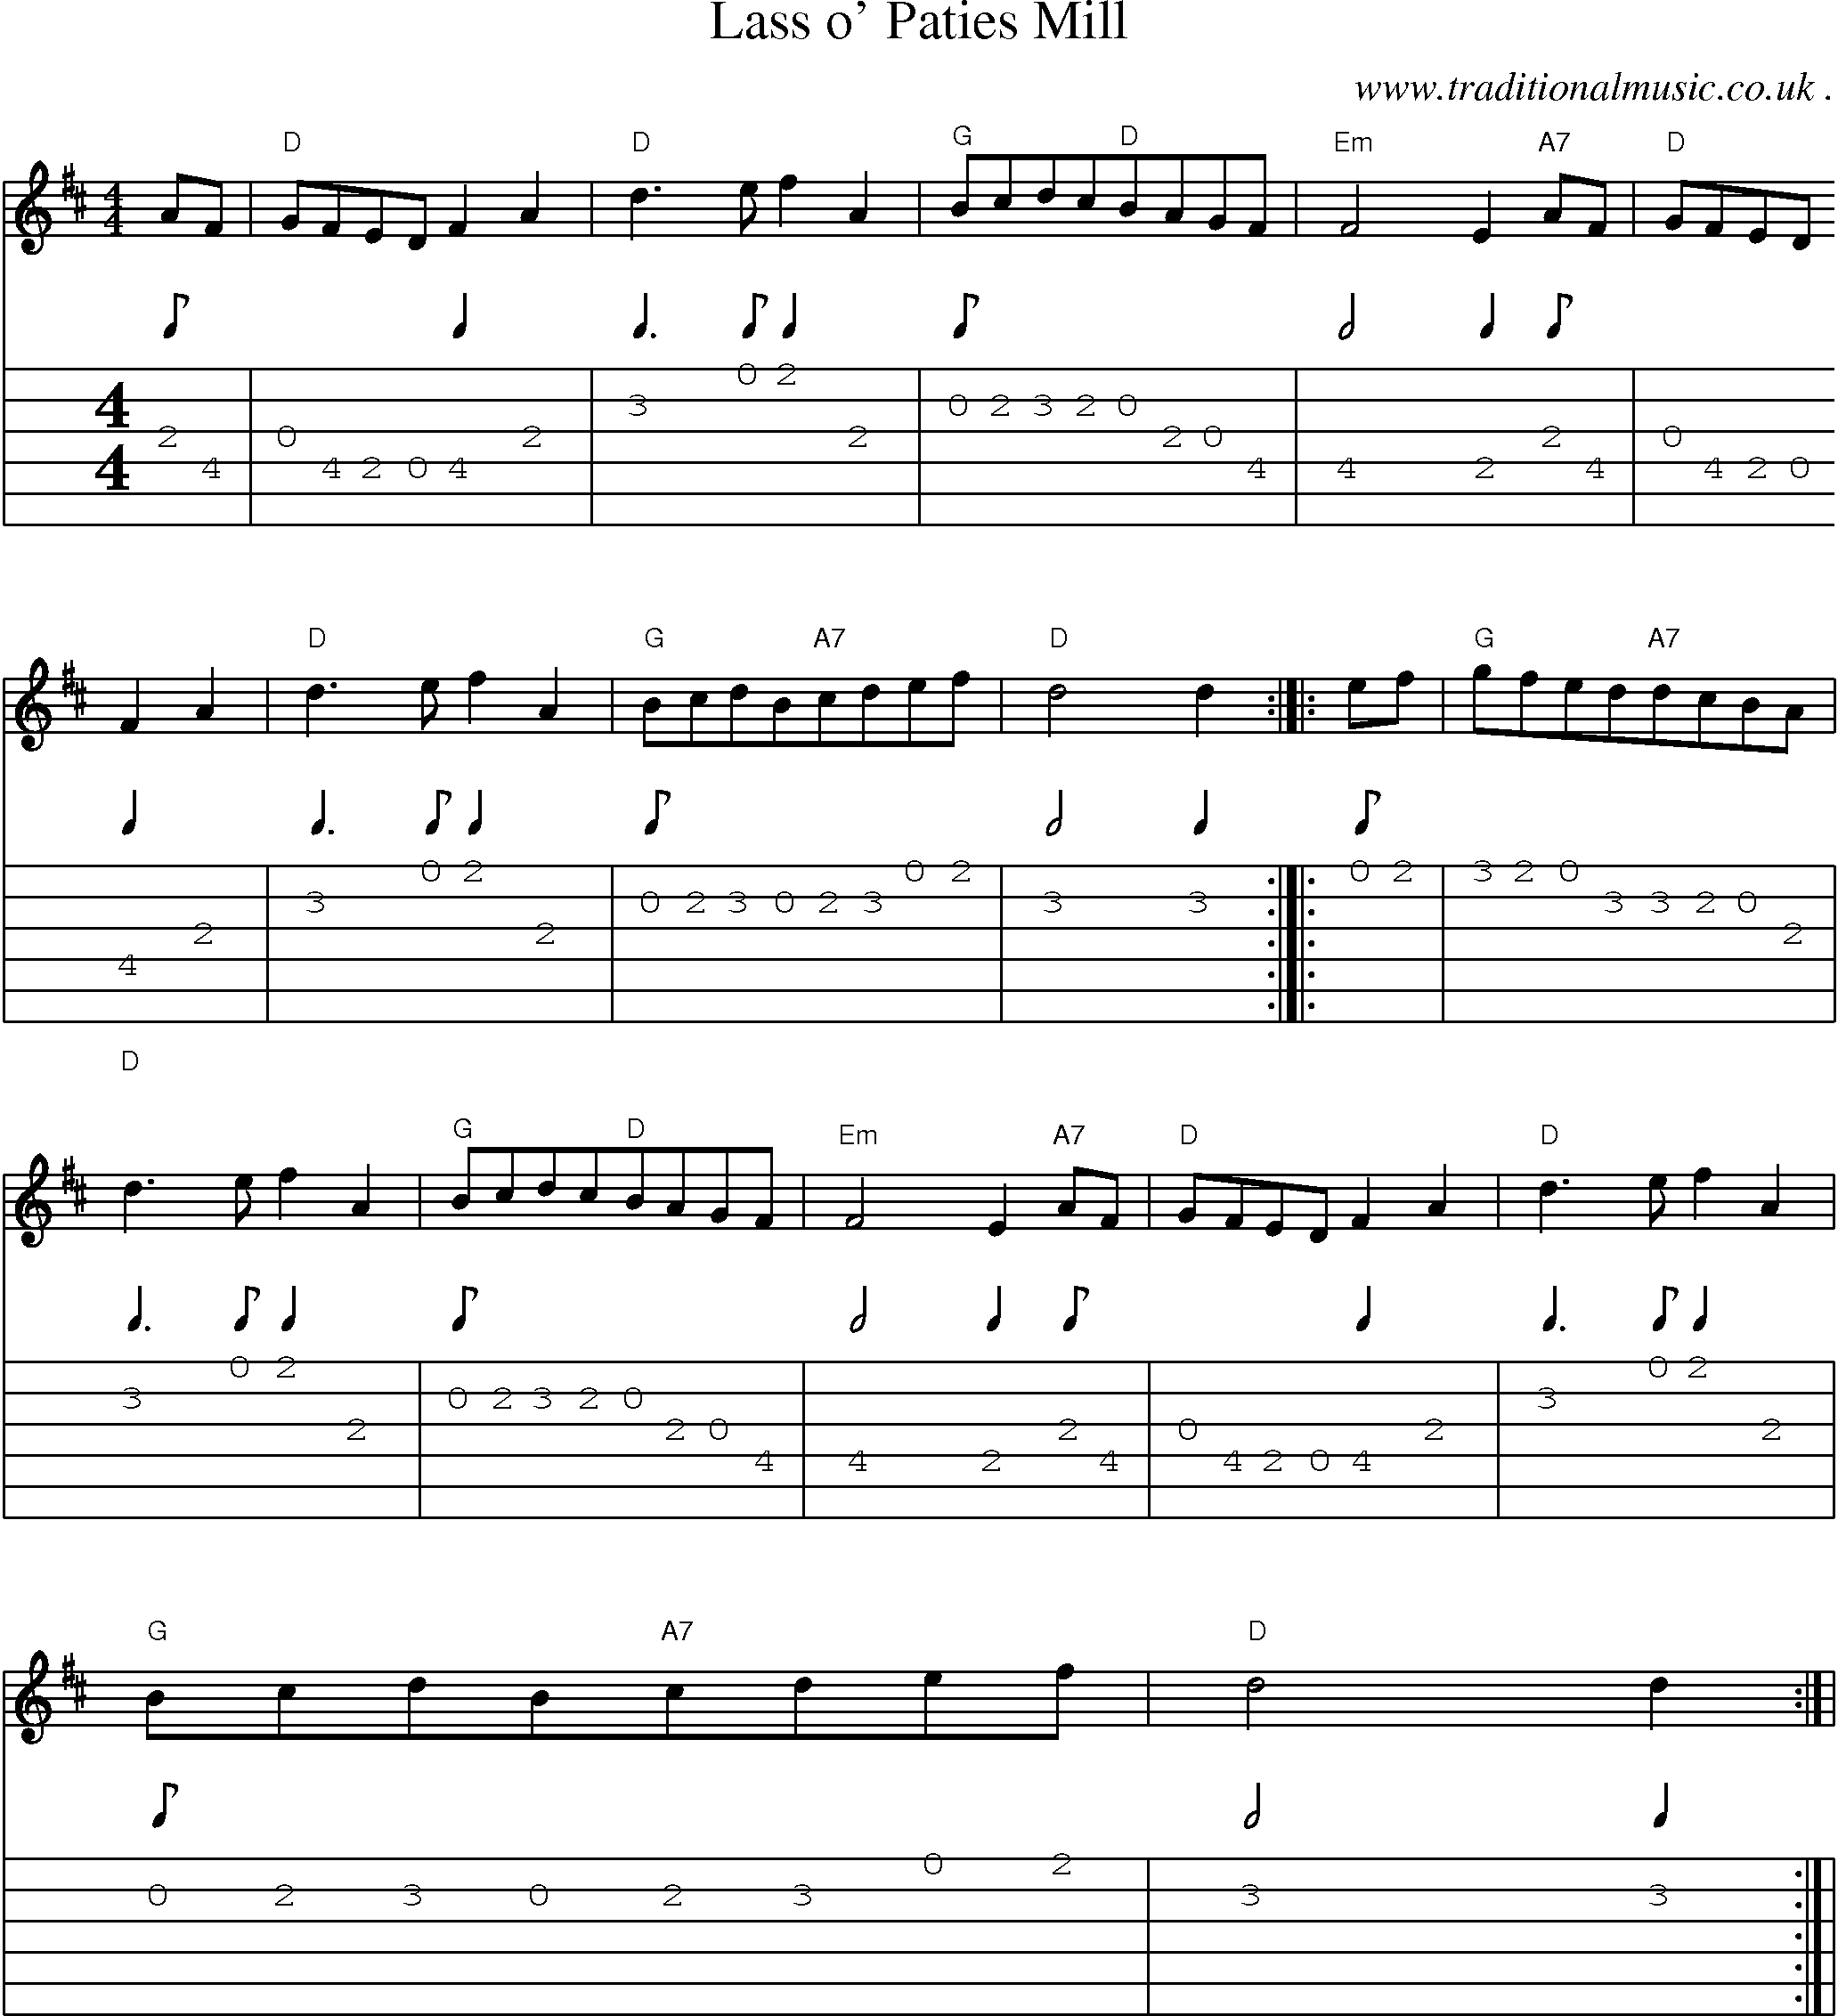 Sheet-Music and Guitar Tabs for Lass O Paties Mill